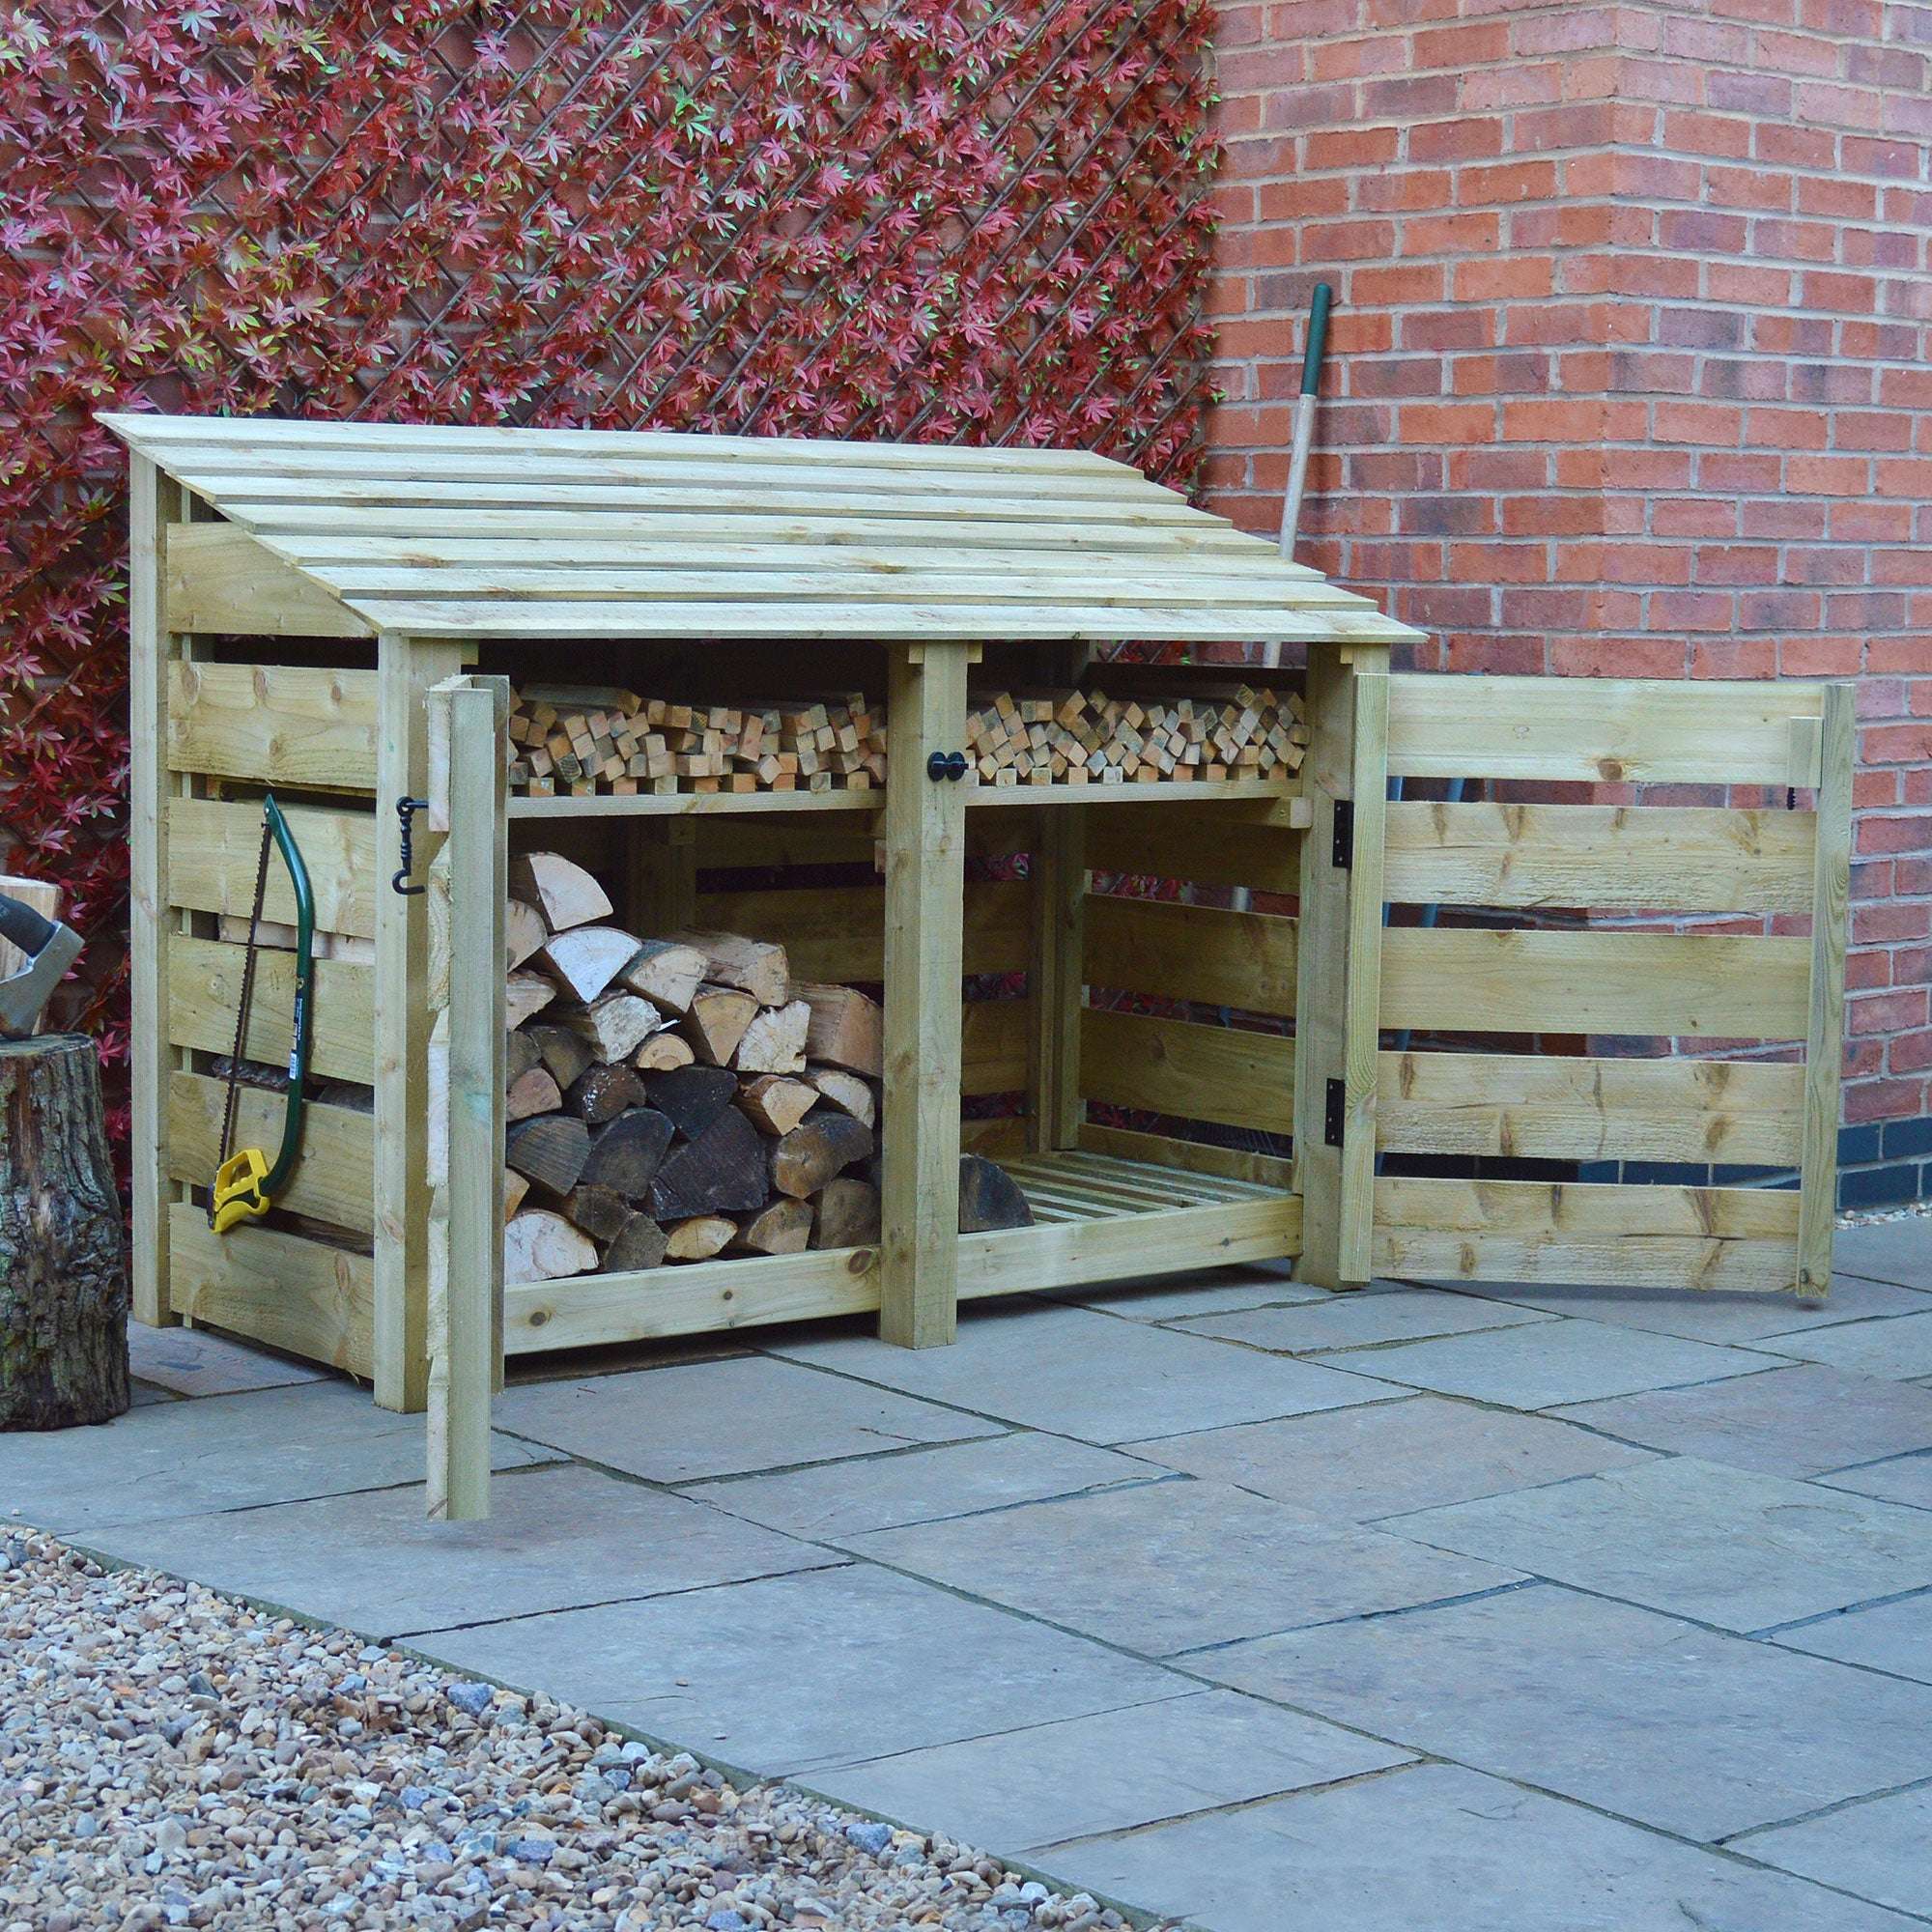 Rutland Country Hambleton Log Store with Door and Kindling Shelf - 4ft:Rutland County,Exceptional Garden